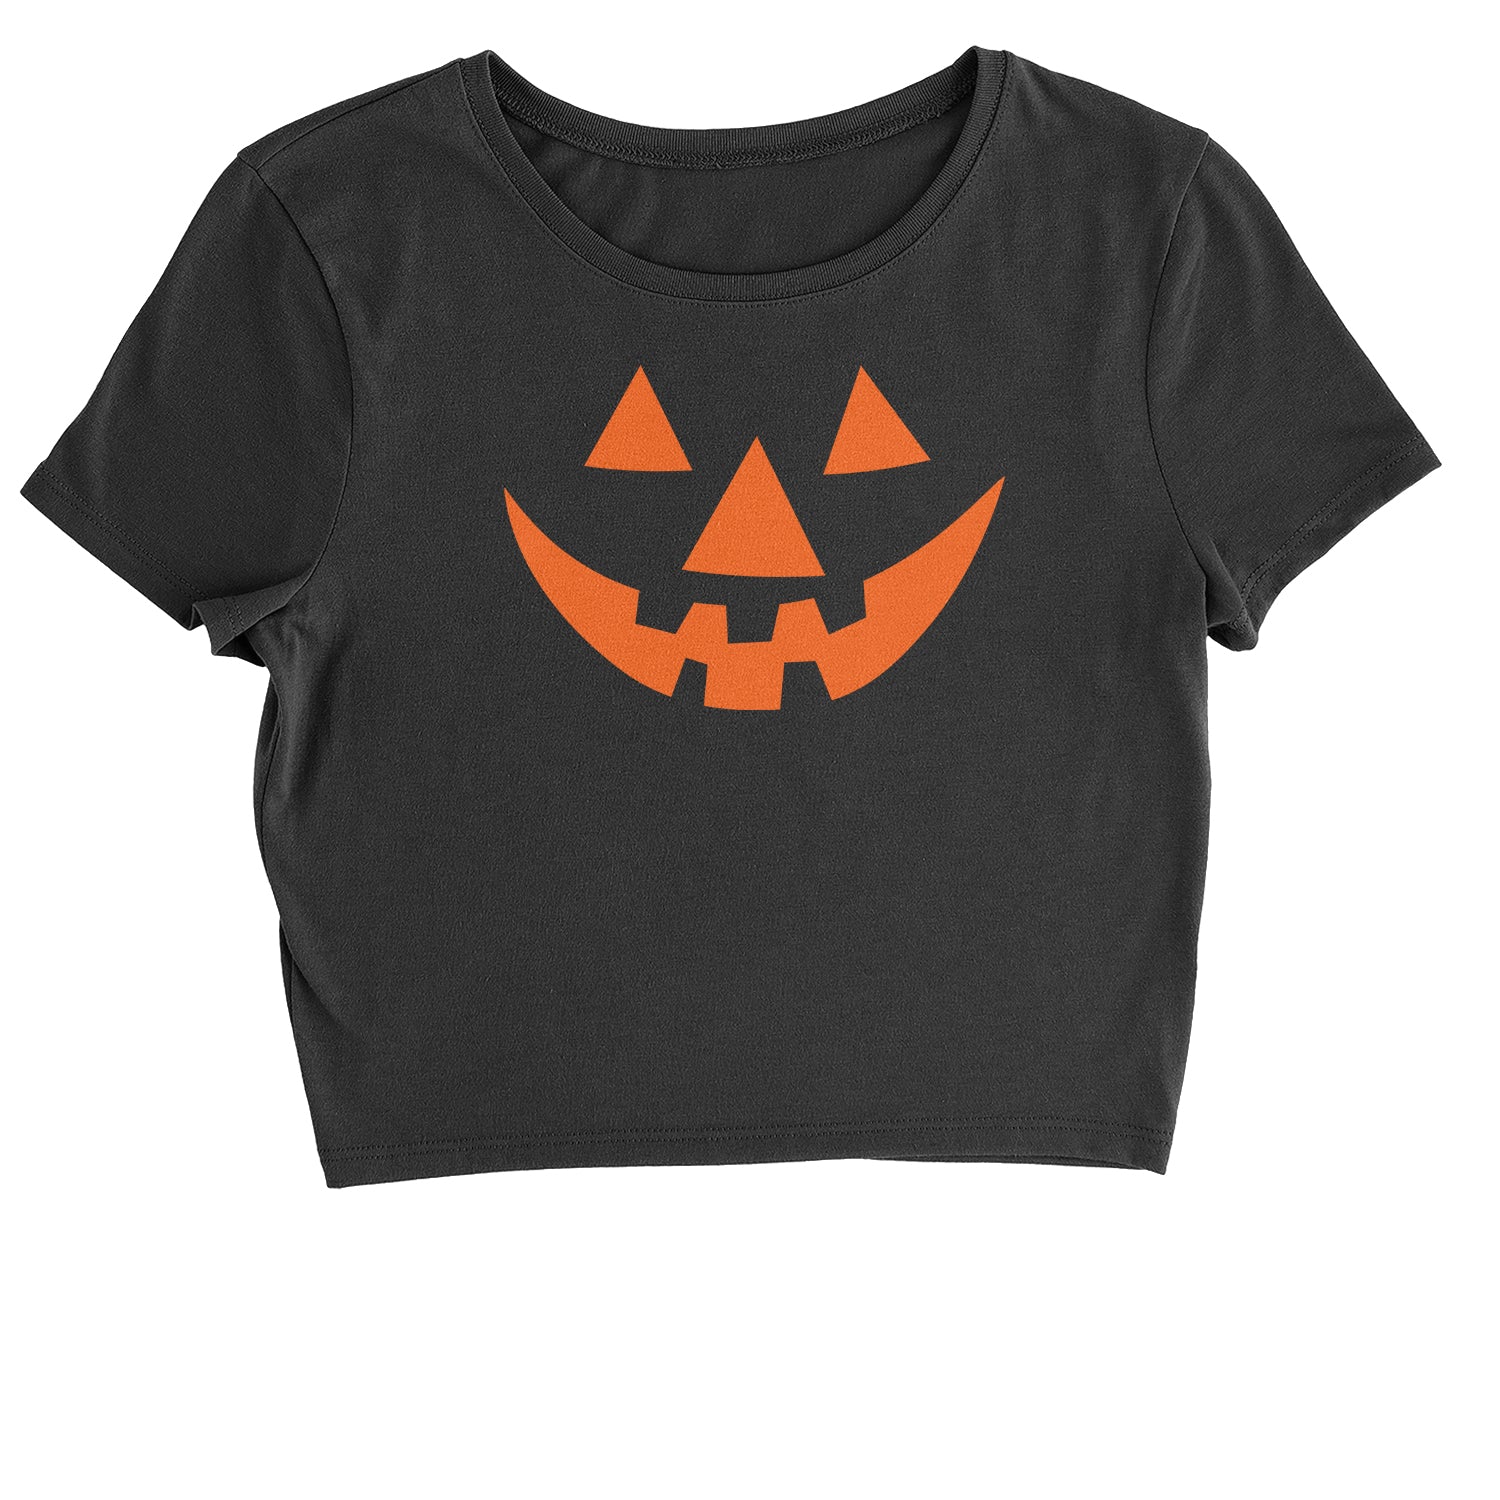 Pumpkin Face (Orange Print) Cropped T-Shirt costume, dress, dressup, eve, halloween, hallows, jackolantern, party, up by Expression Tees